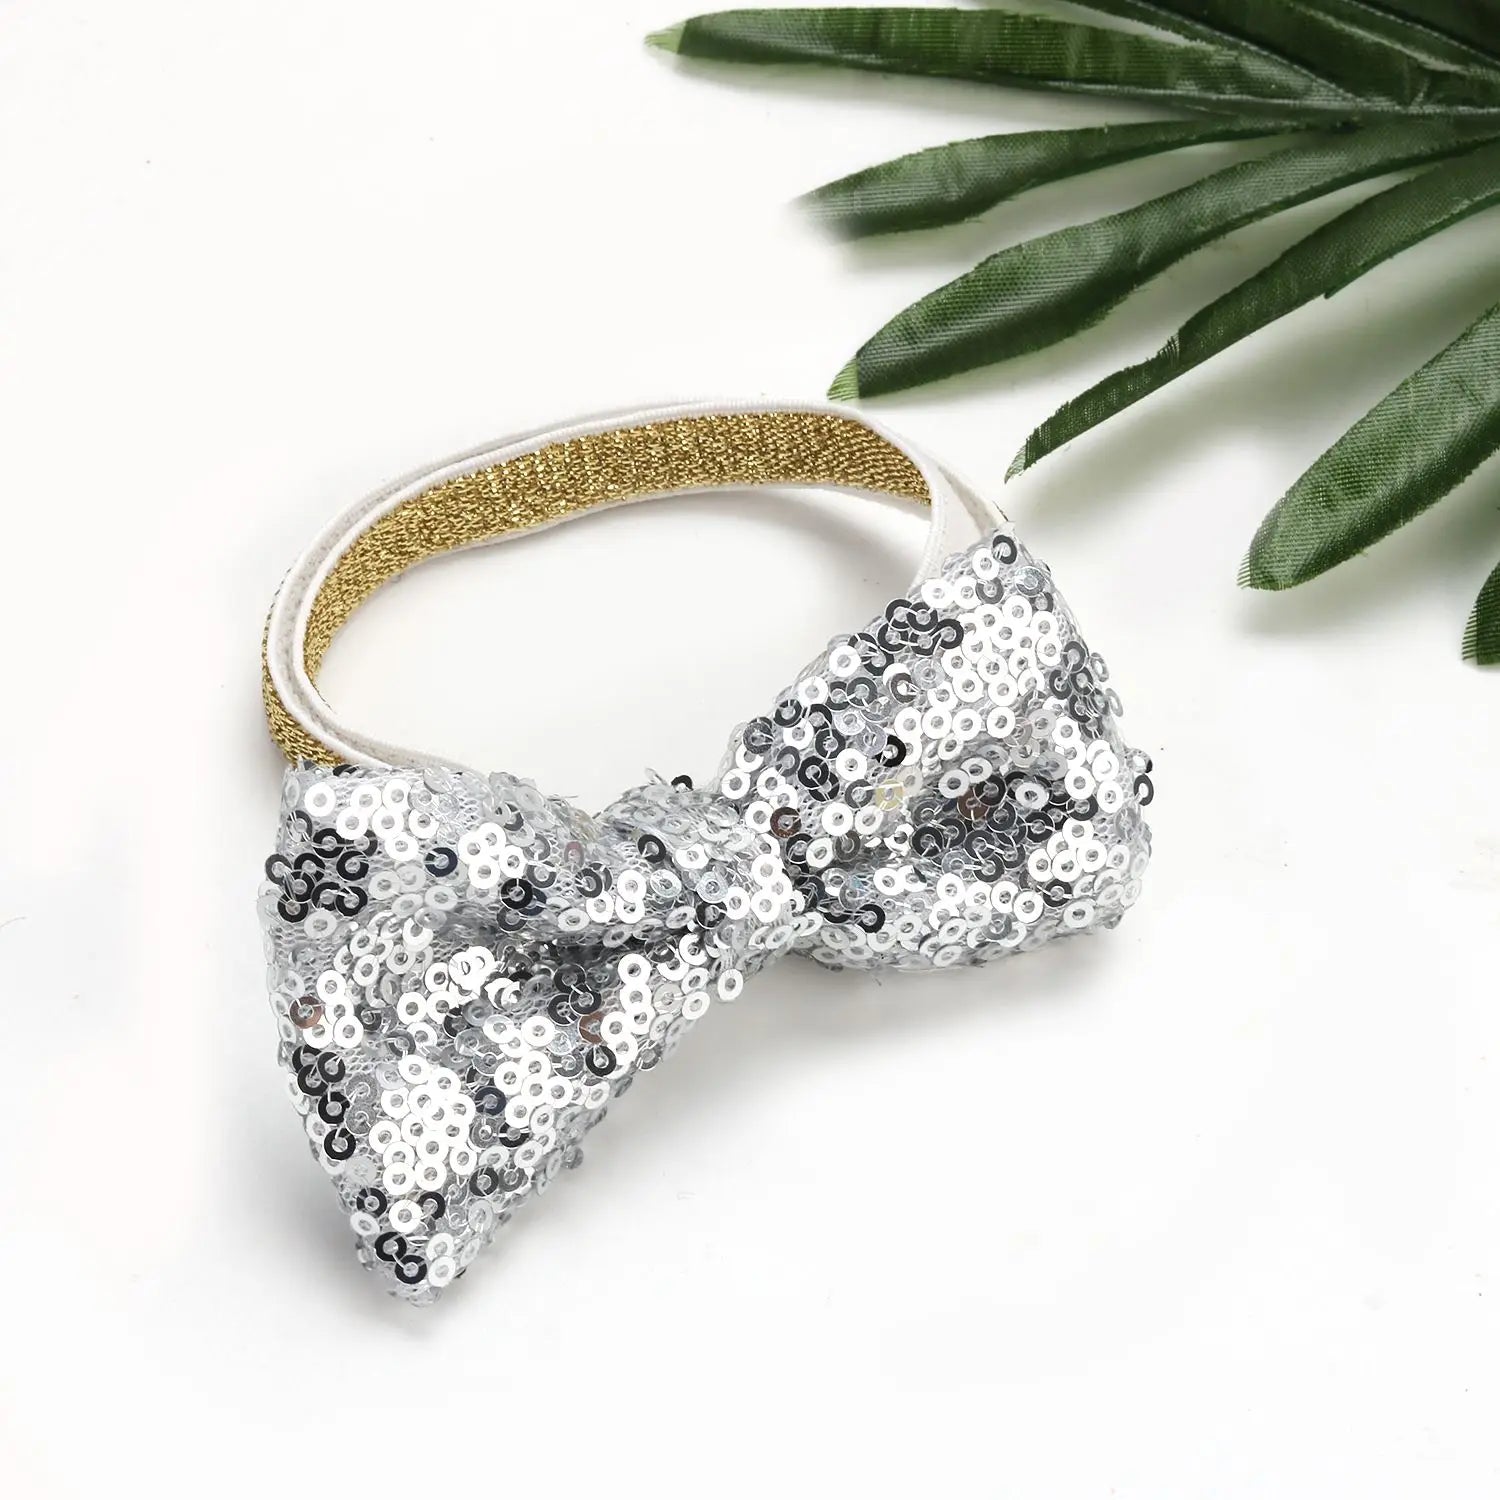 Pets Grooming Accessories Cute Dog Puppy Cat Kitten Pet Toy Kid Sequin Bow Tie Clothes Cat Dog Necktie for Birthday Christmas